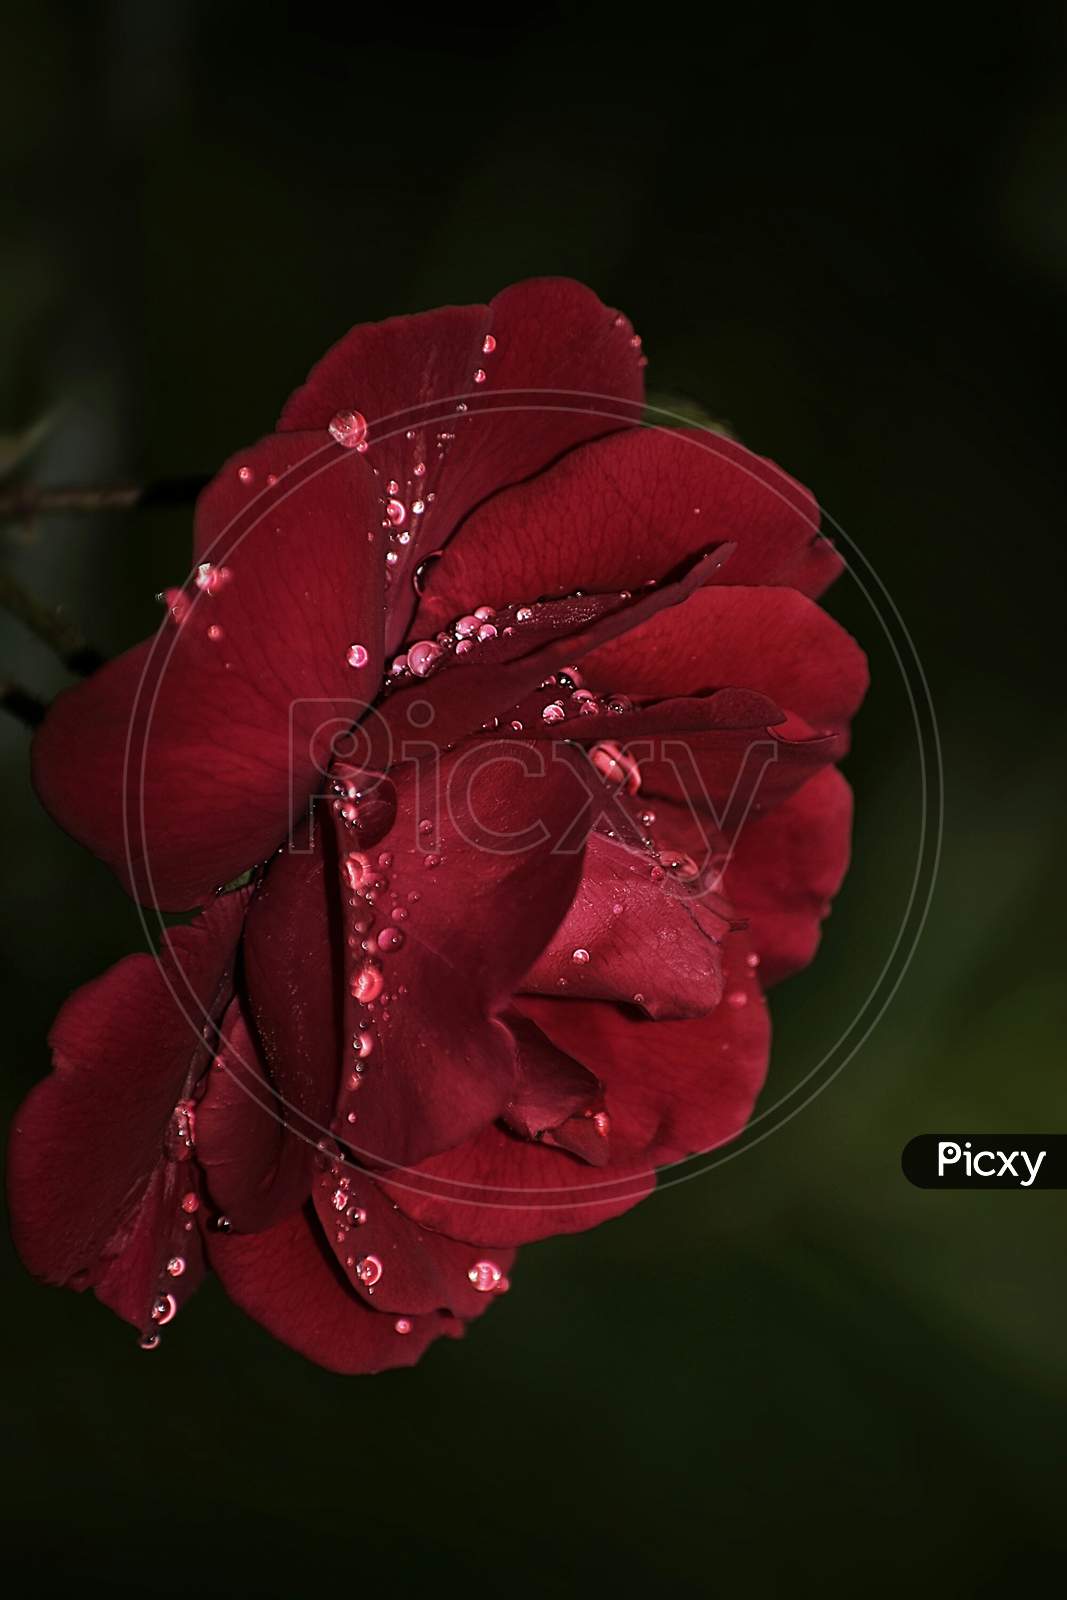 A Beautiful Closeup Photograph Of A Red Rose With Rain Drops.